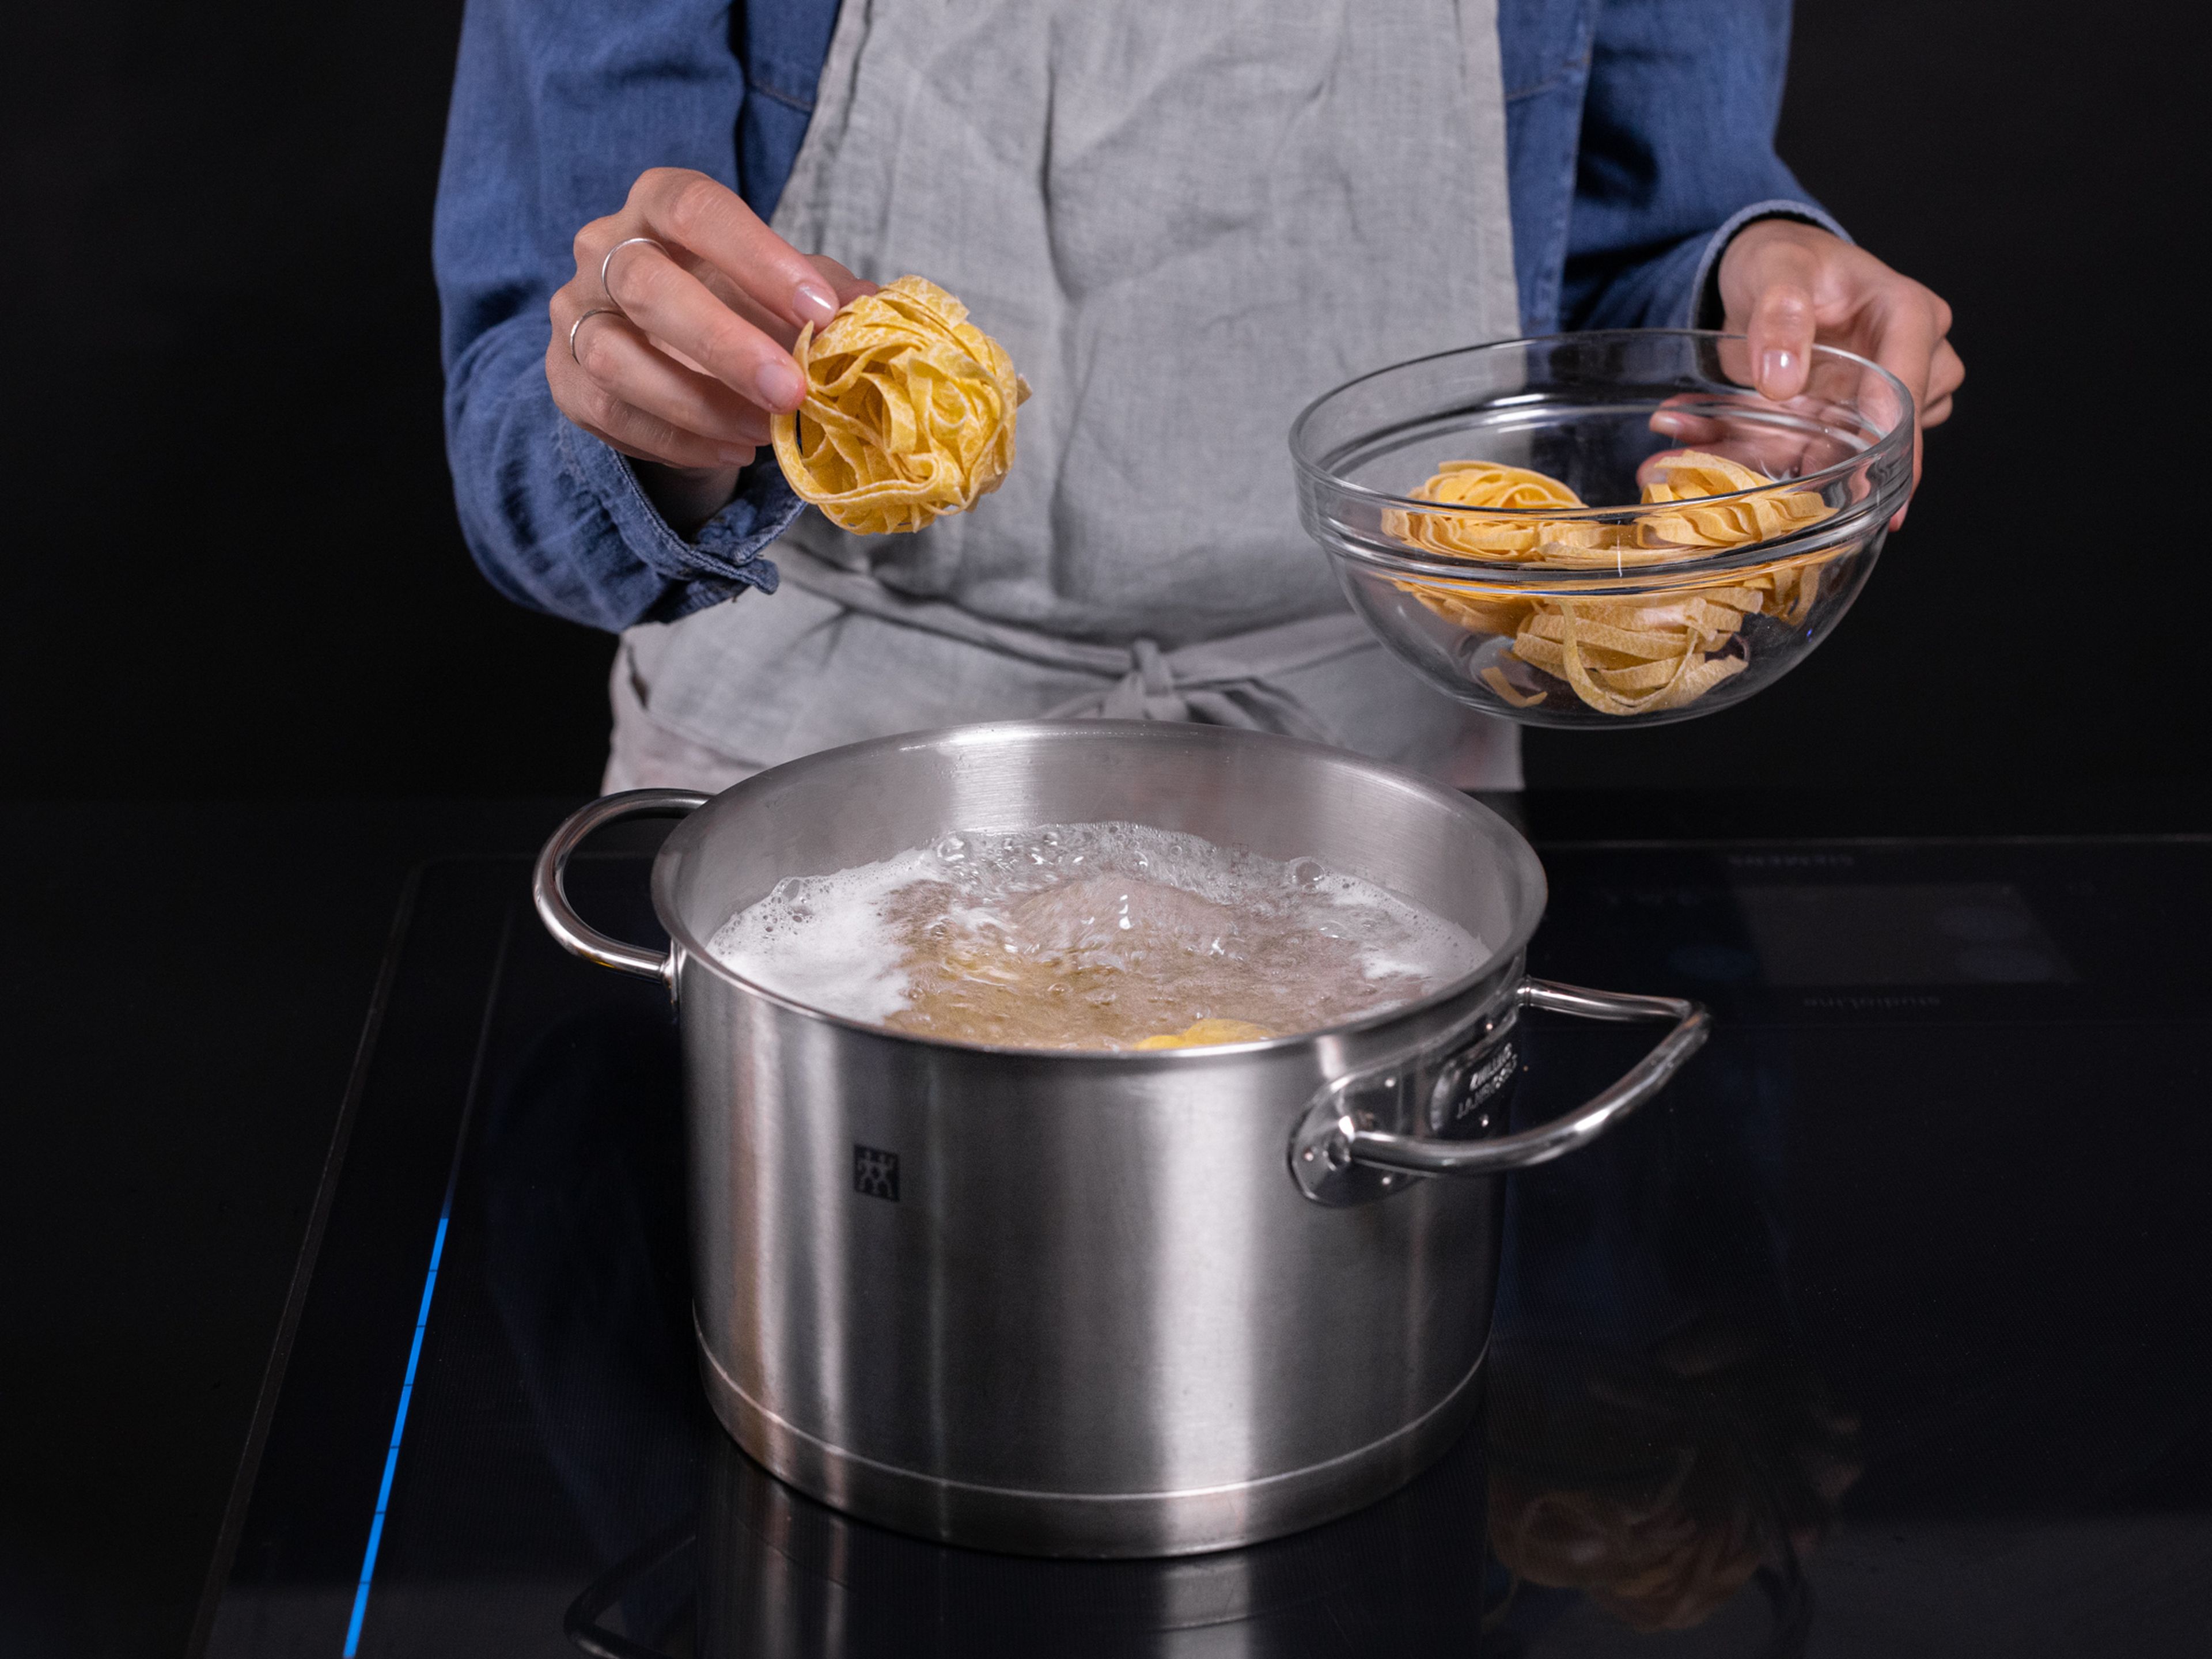 Cook tagliatelle for approx. 6 min., or until al dente, in a large pot of boiling, salted water.